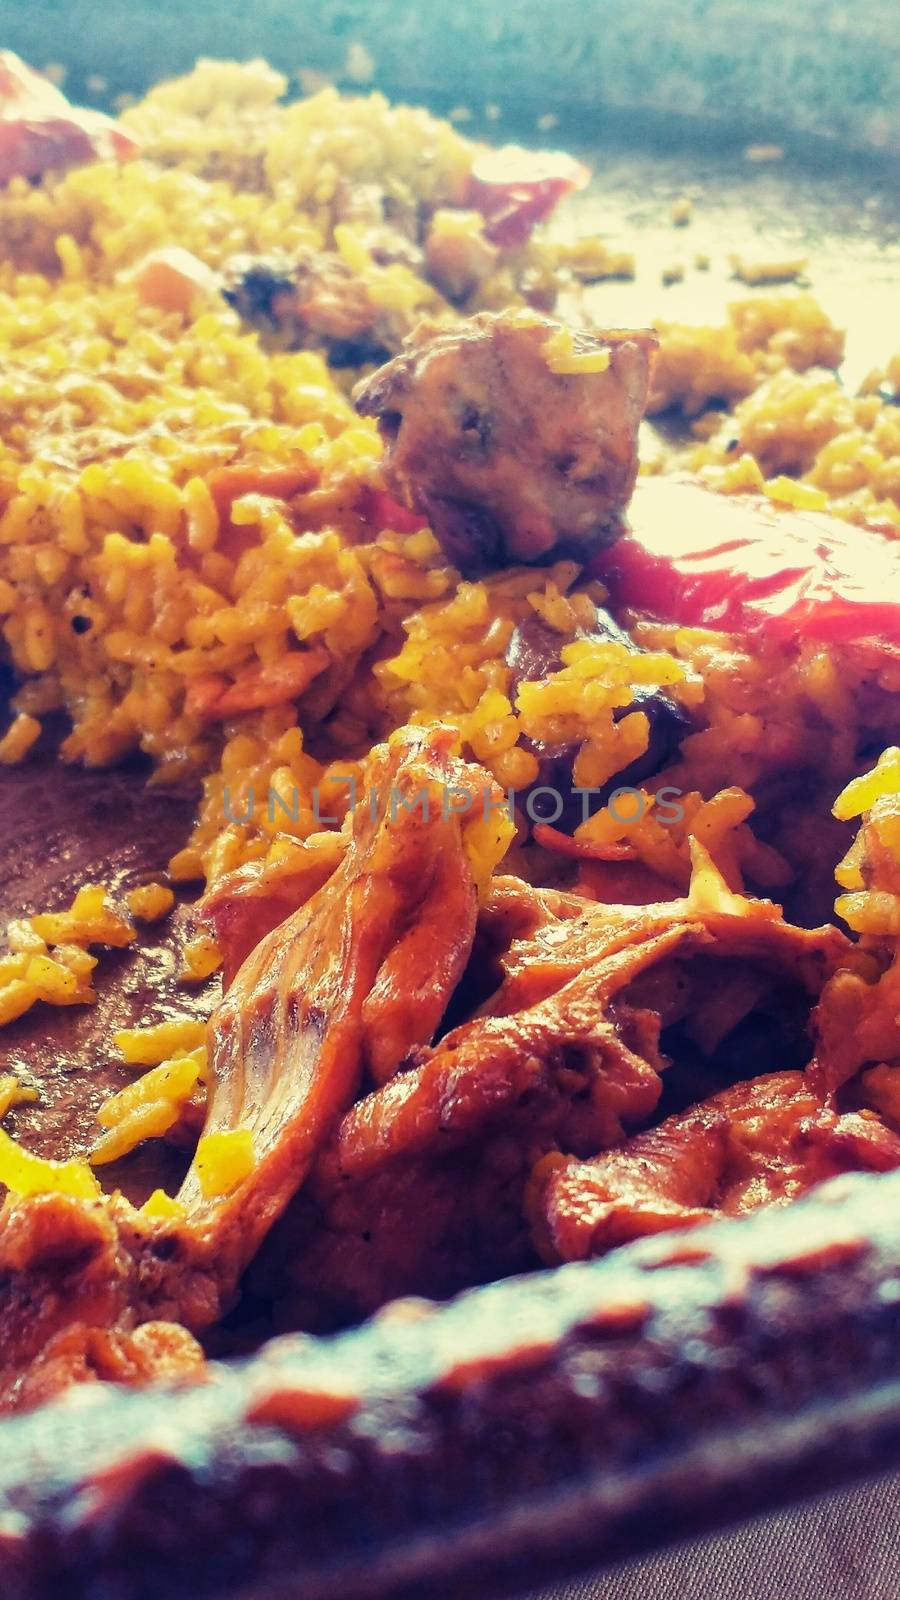 Delicious Rice paella with rabbit by soniabonet